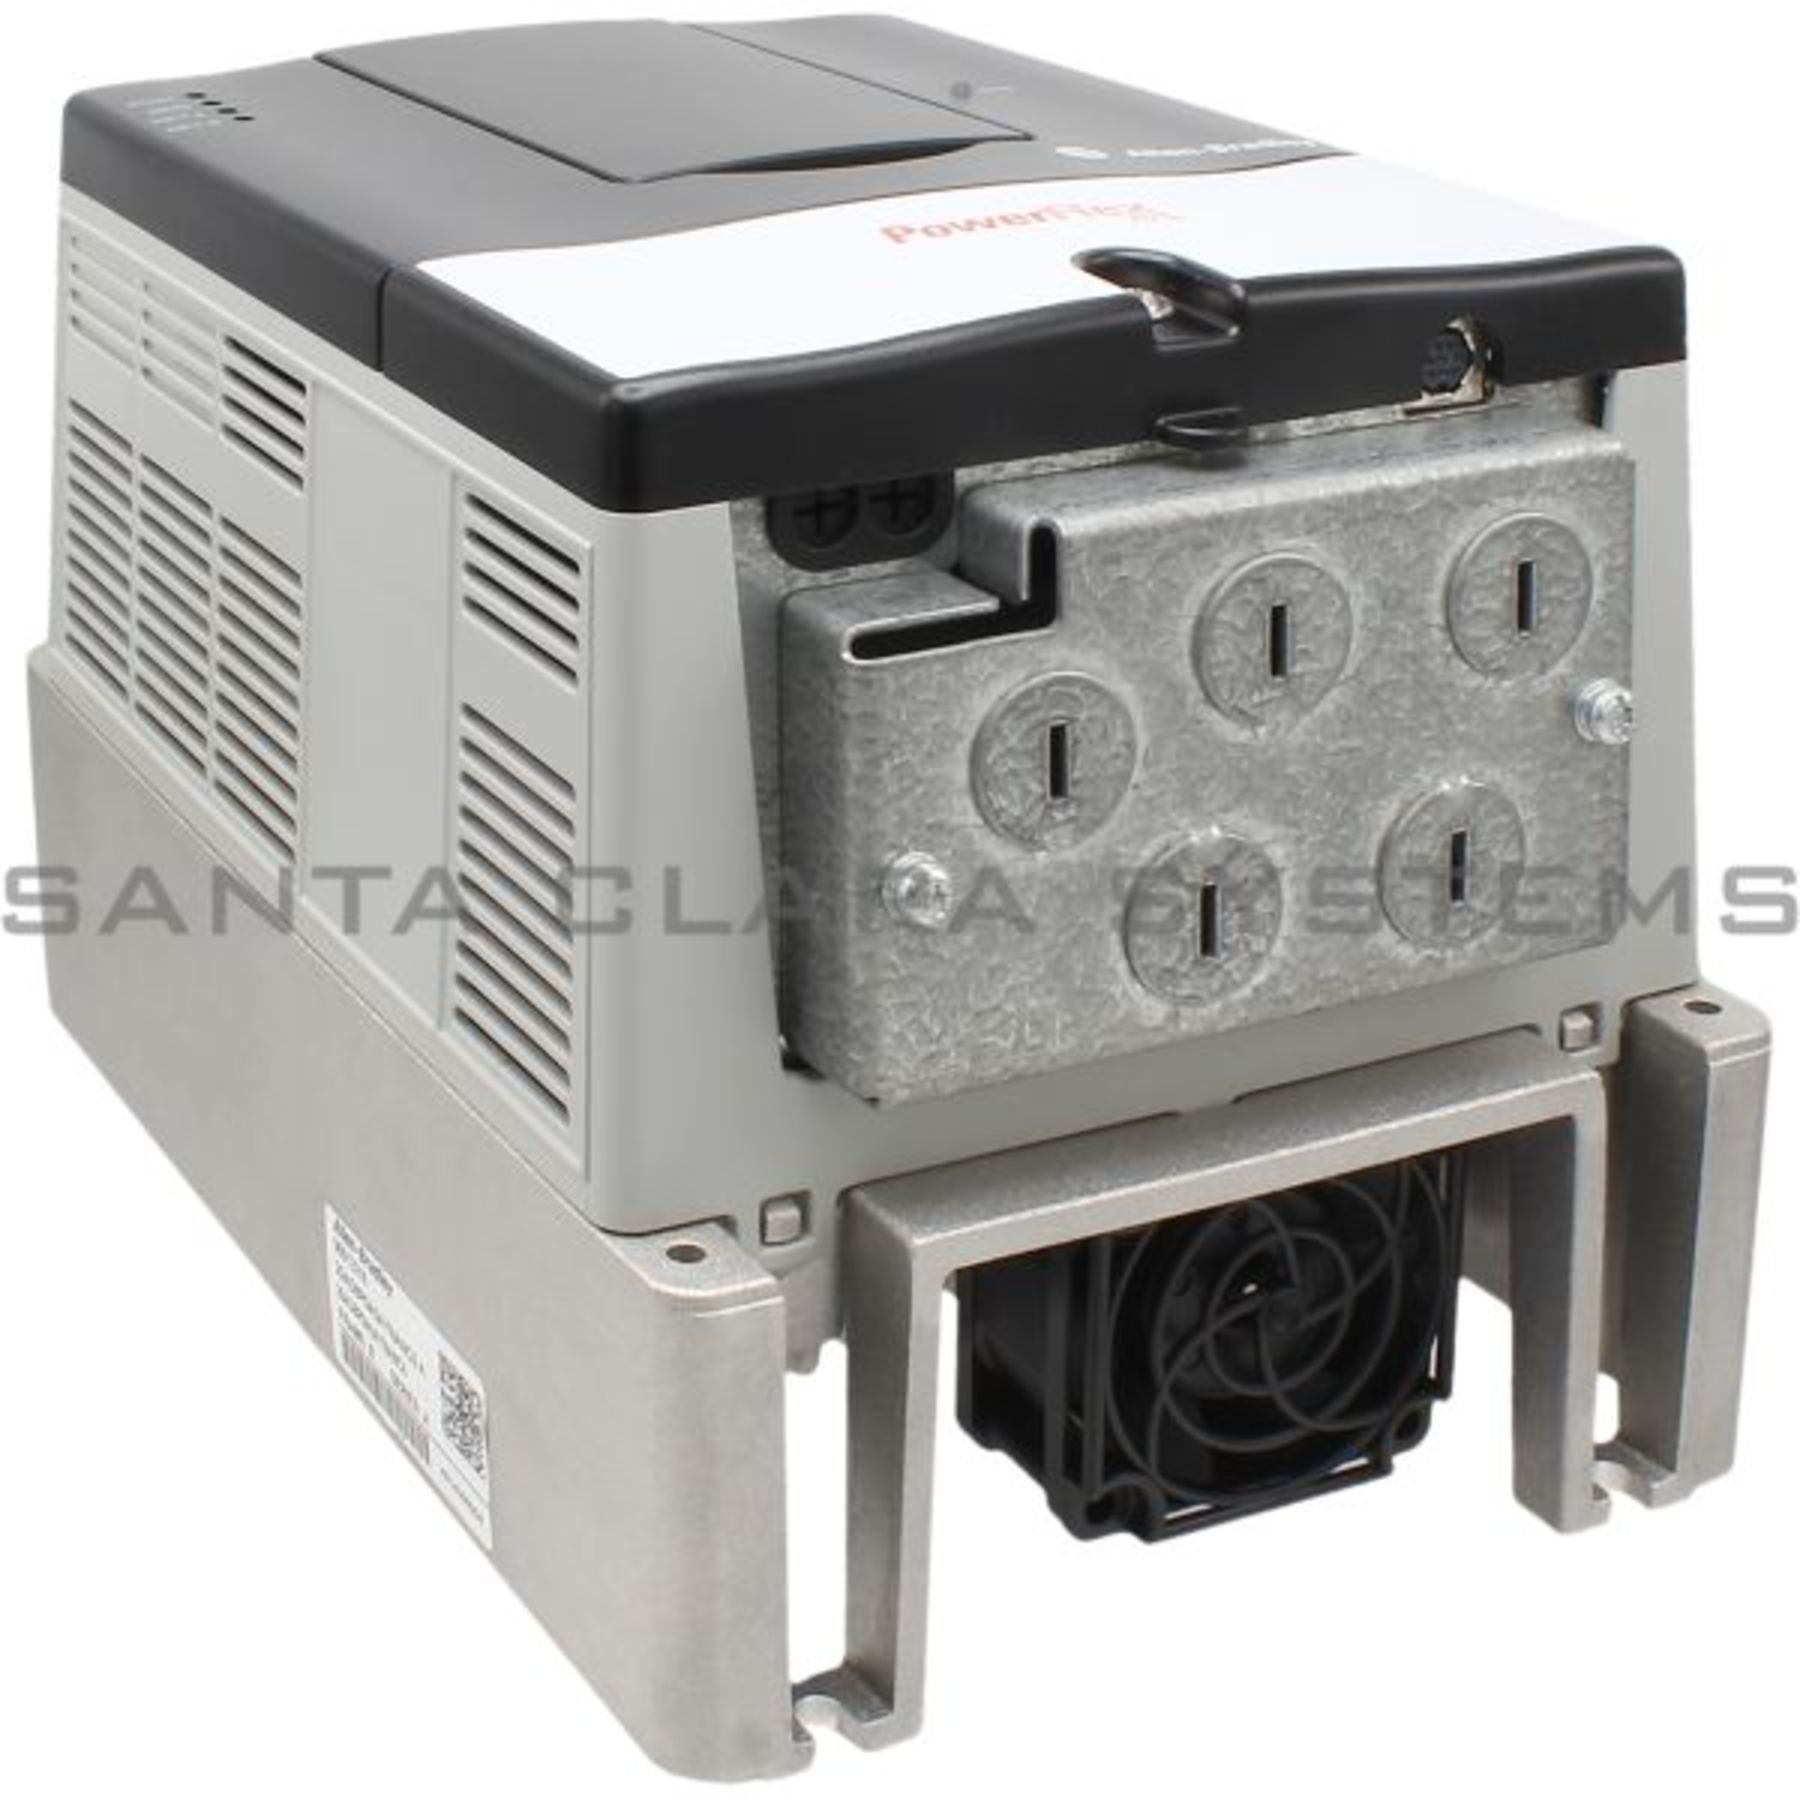 20AD8P0A0AYNANC0 Allen Bradley In stock and ready to ship - Santa